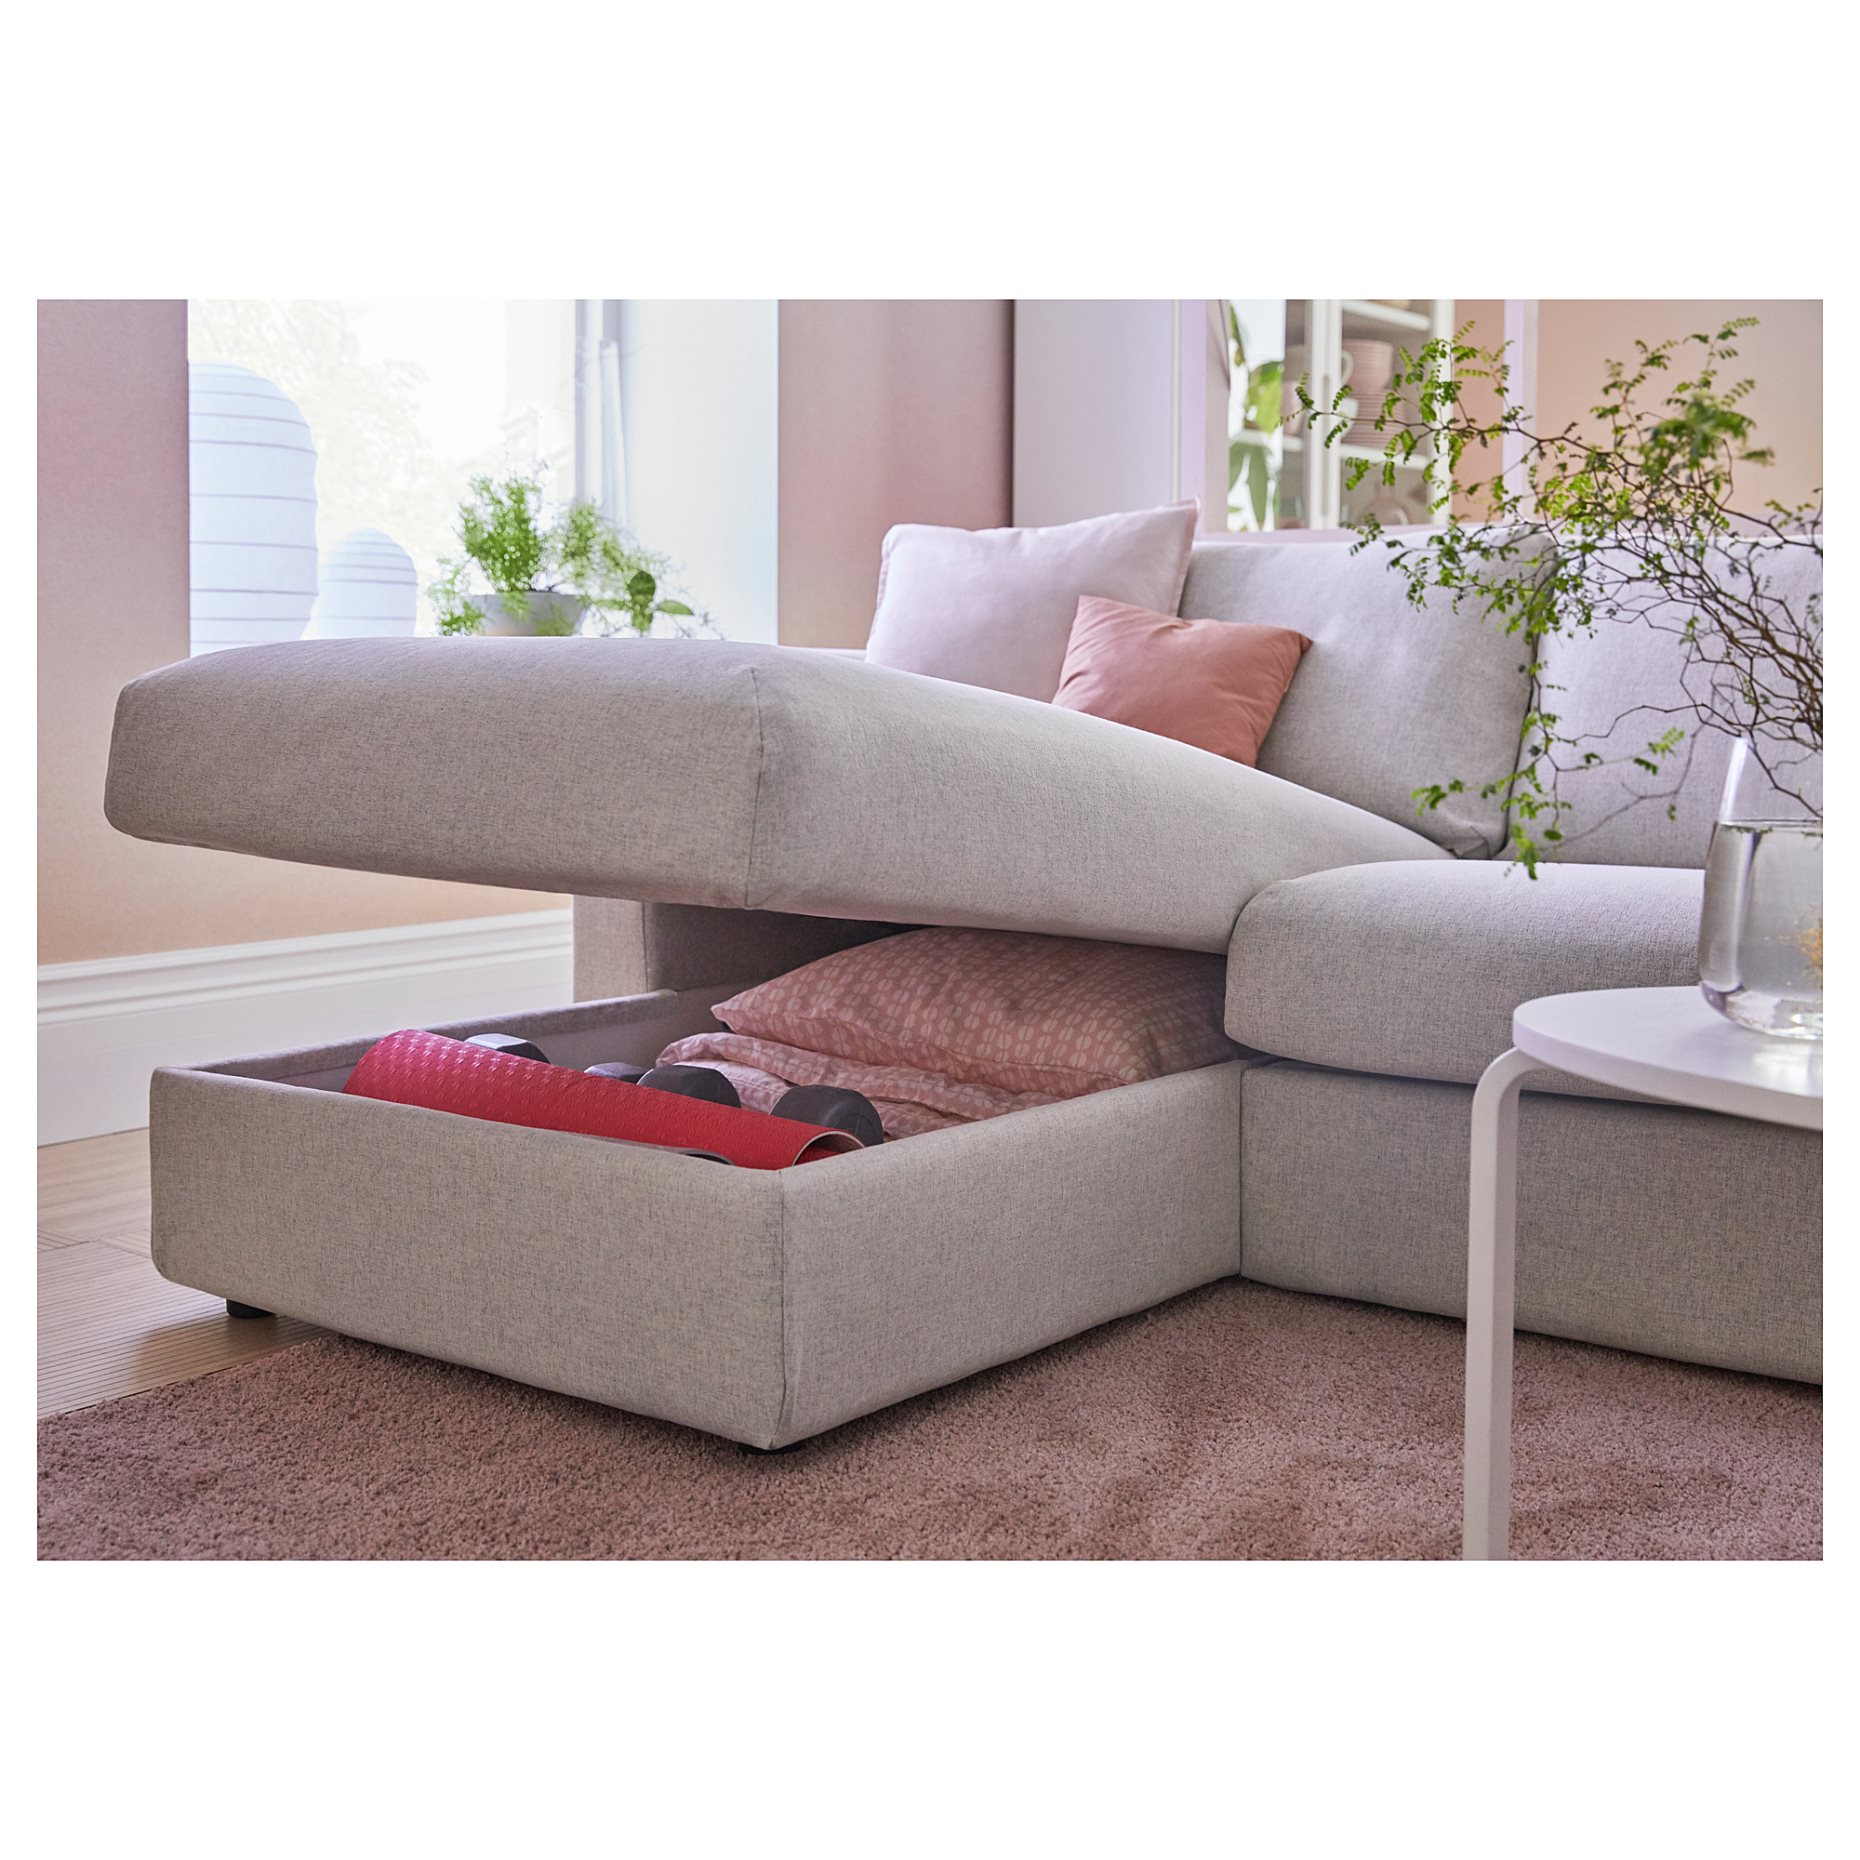 VIMLE, 3-seat sofa-bed with chaise longue, 195.452.42